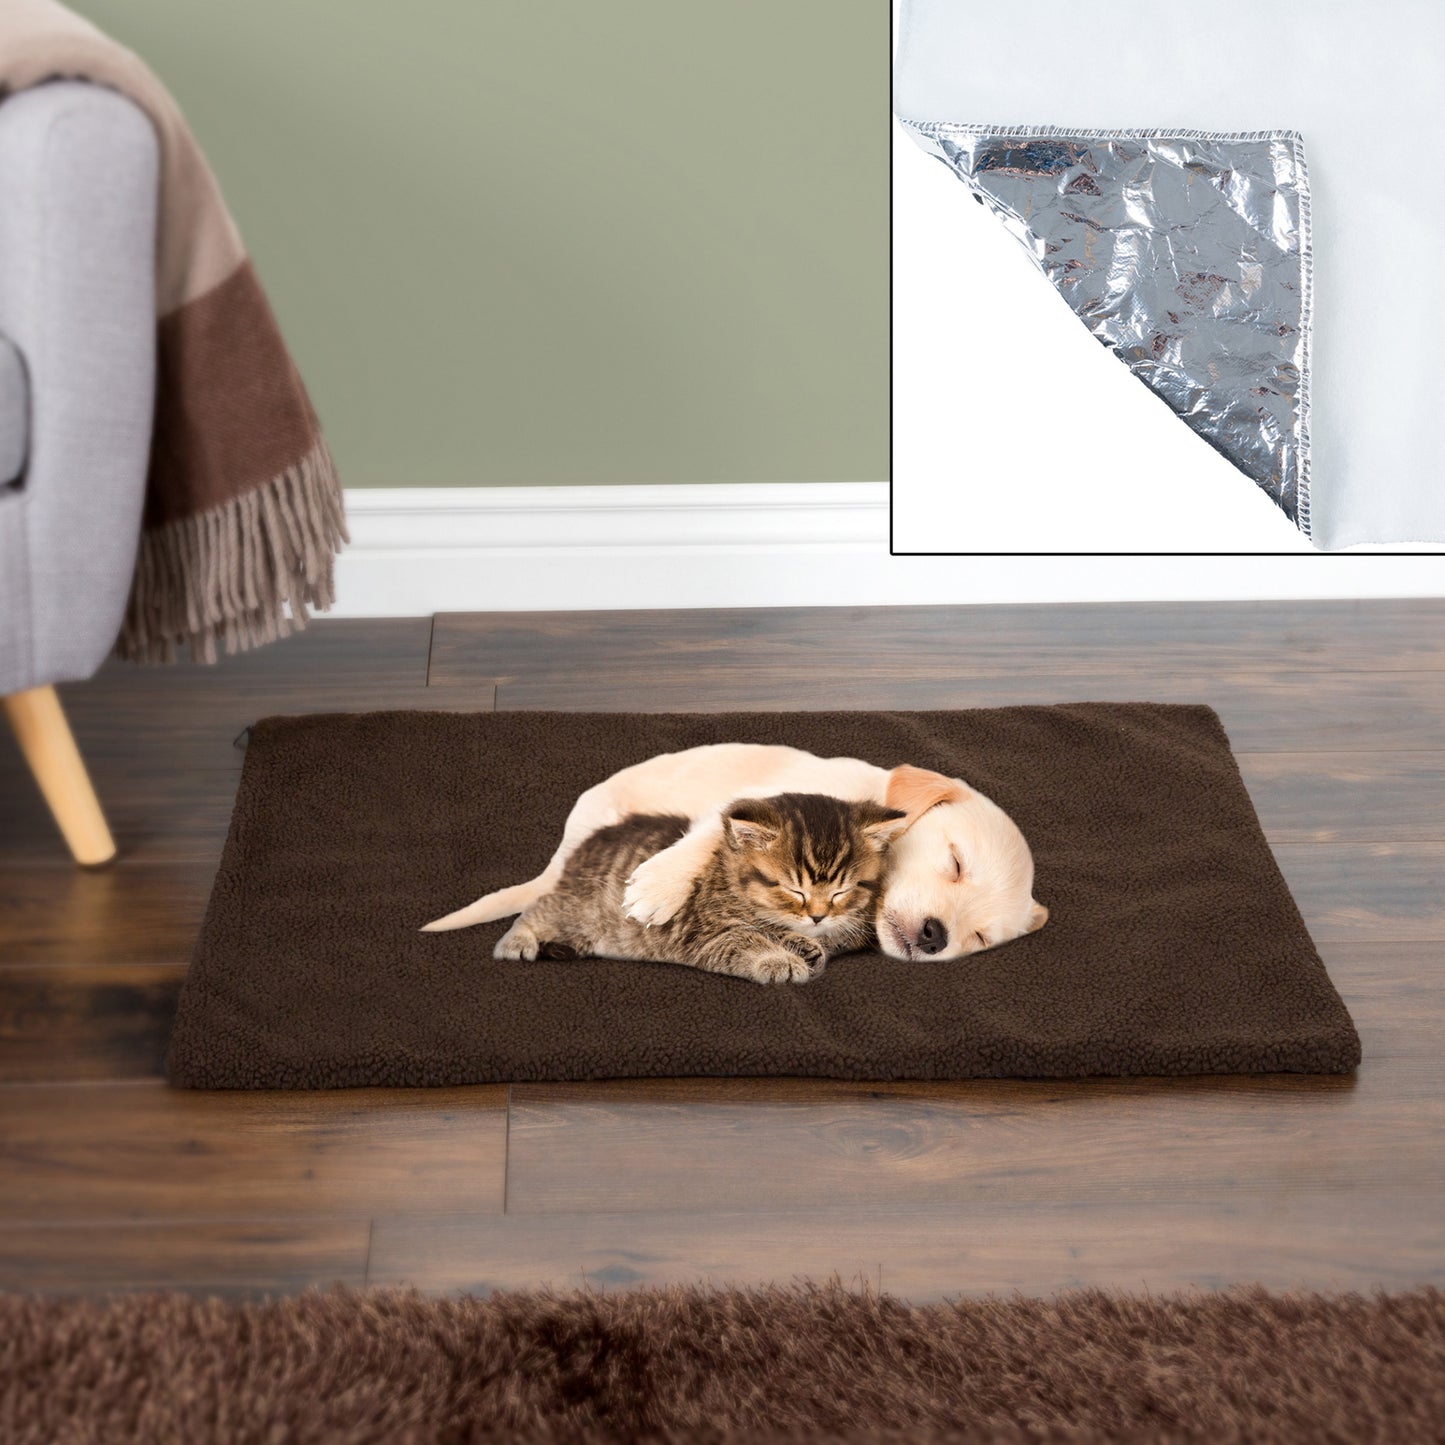 Pet Heating Pad for Dogs and Cats